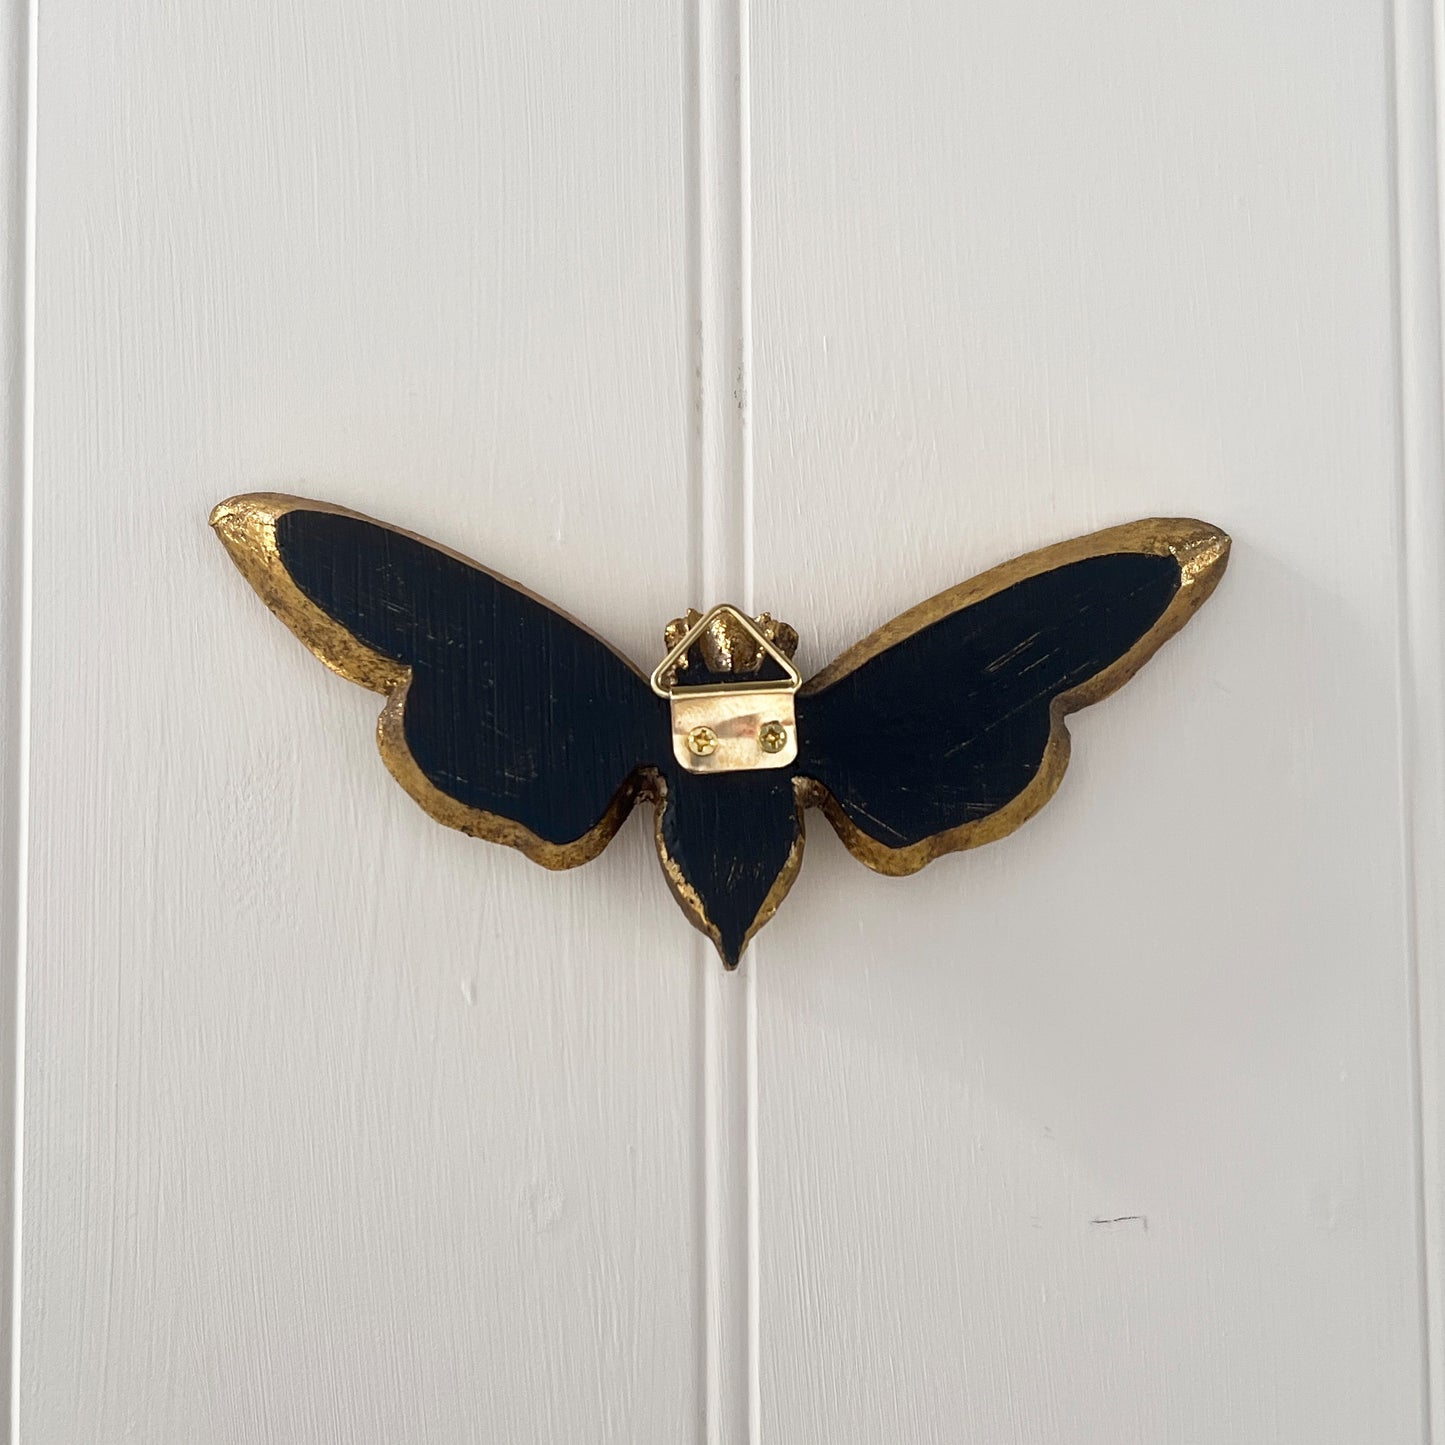 Rustic Wall Mounted Bee Decoration